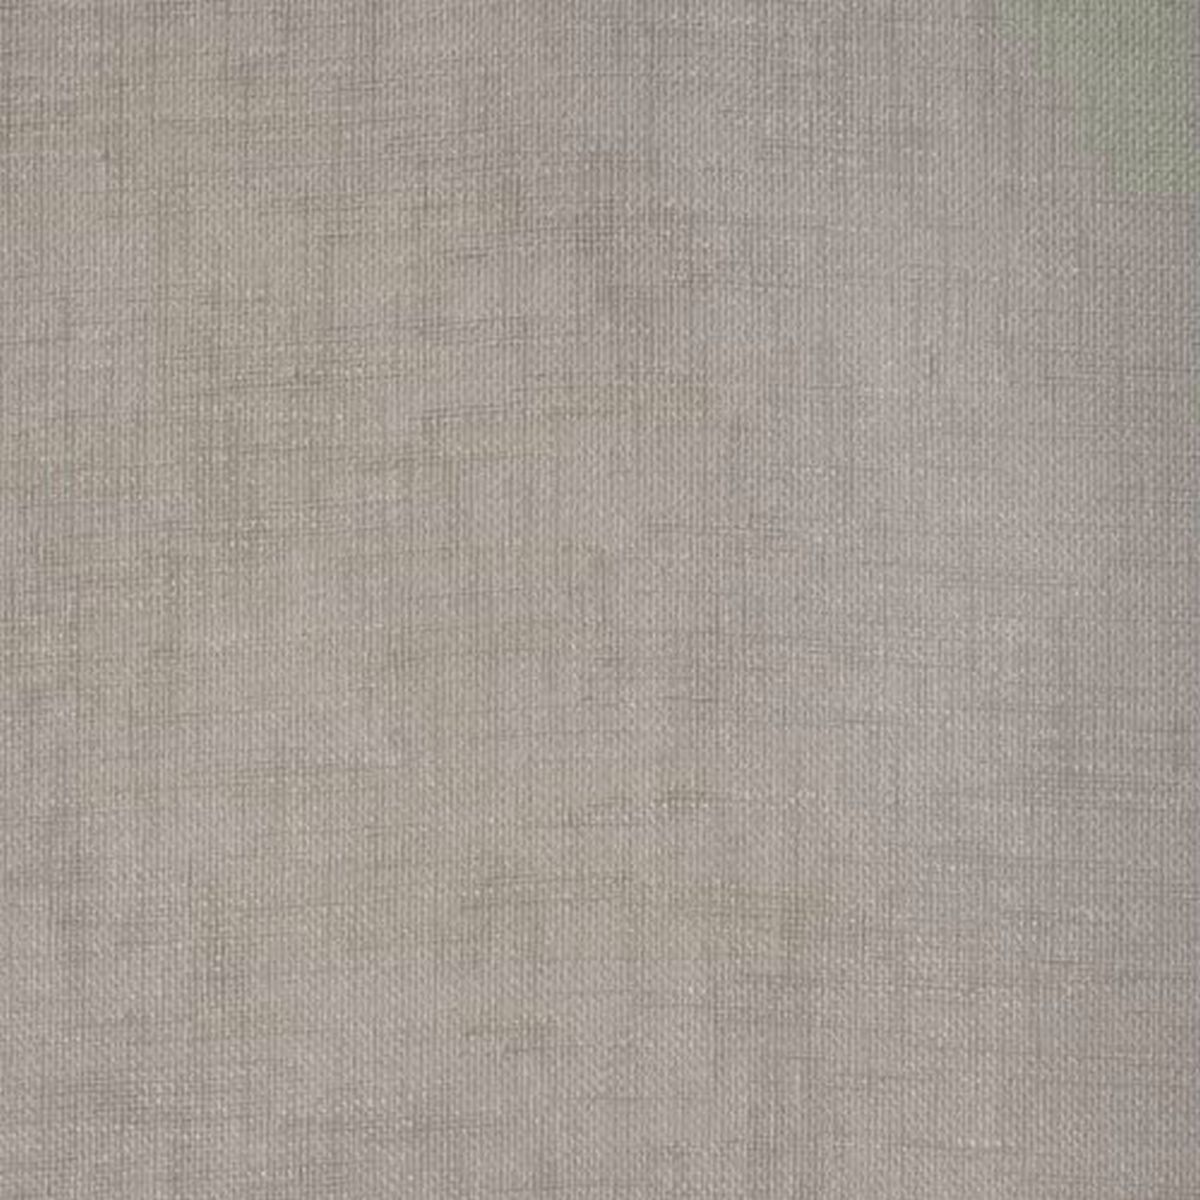 Chantilly Pebble Fabric by Chatham Glyn